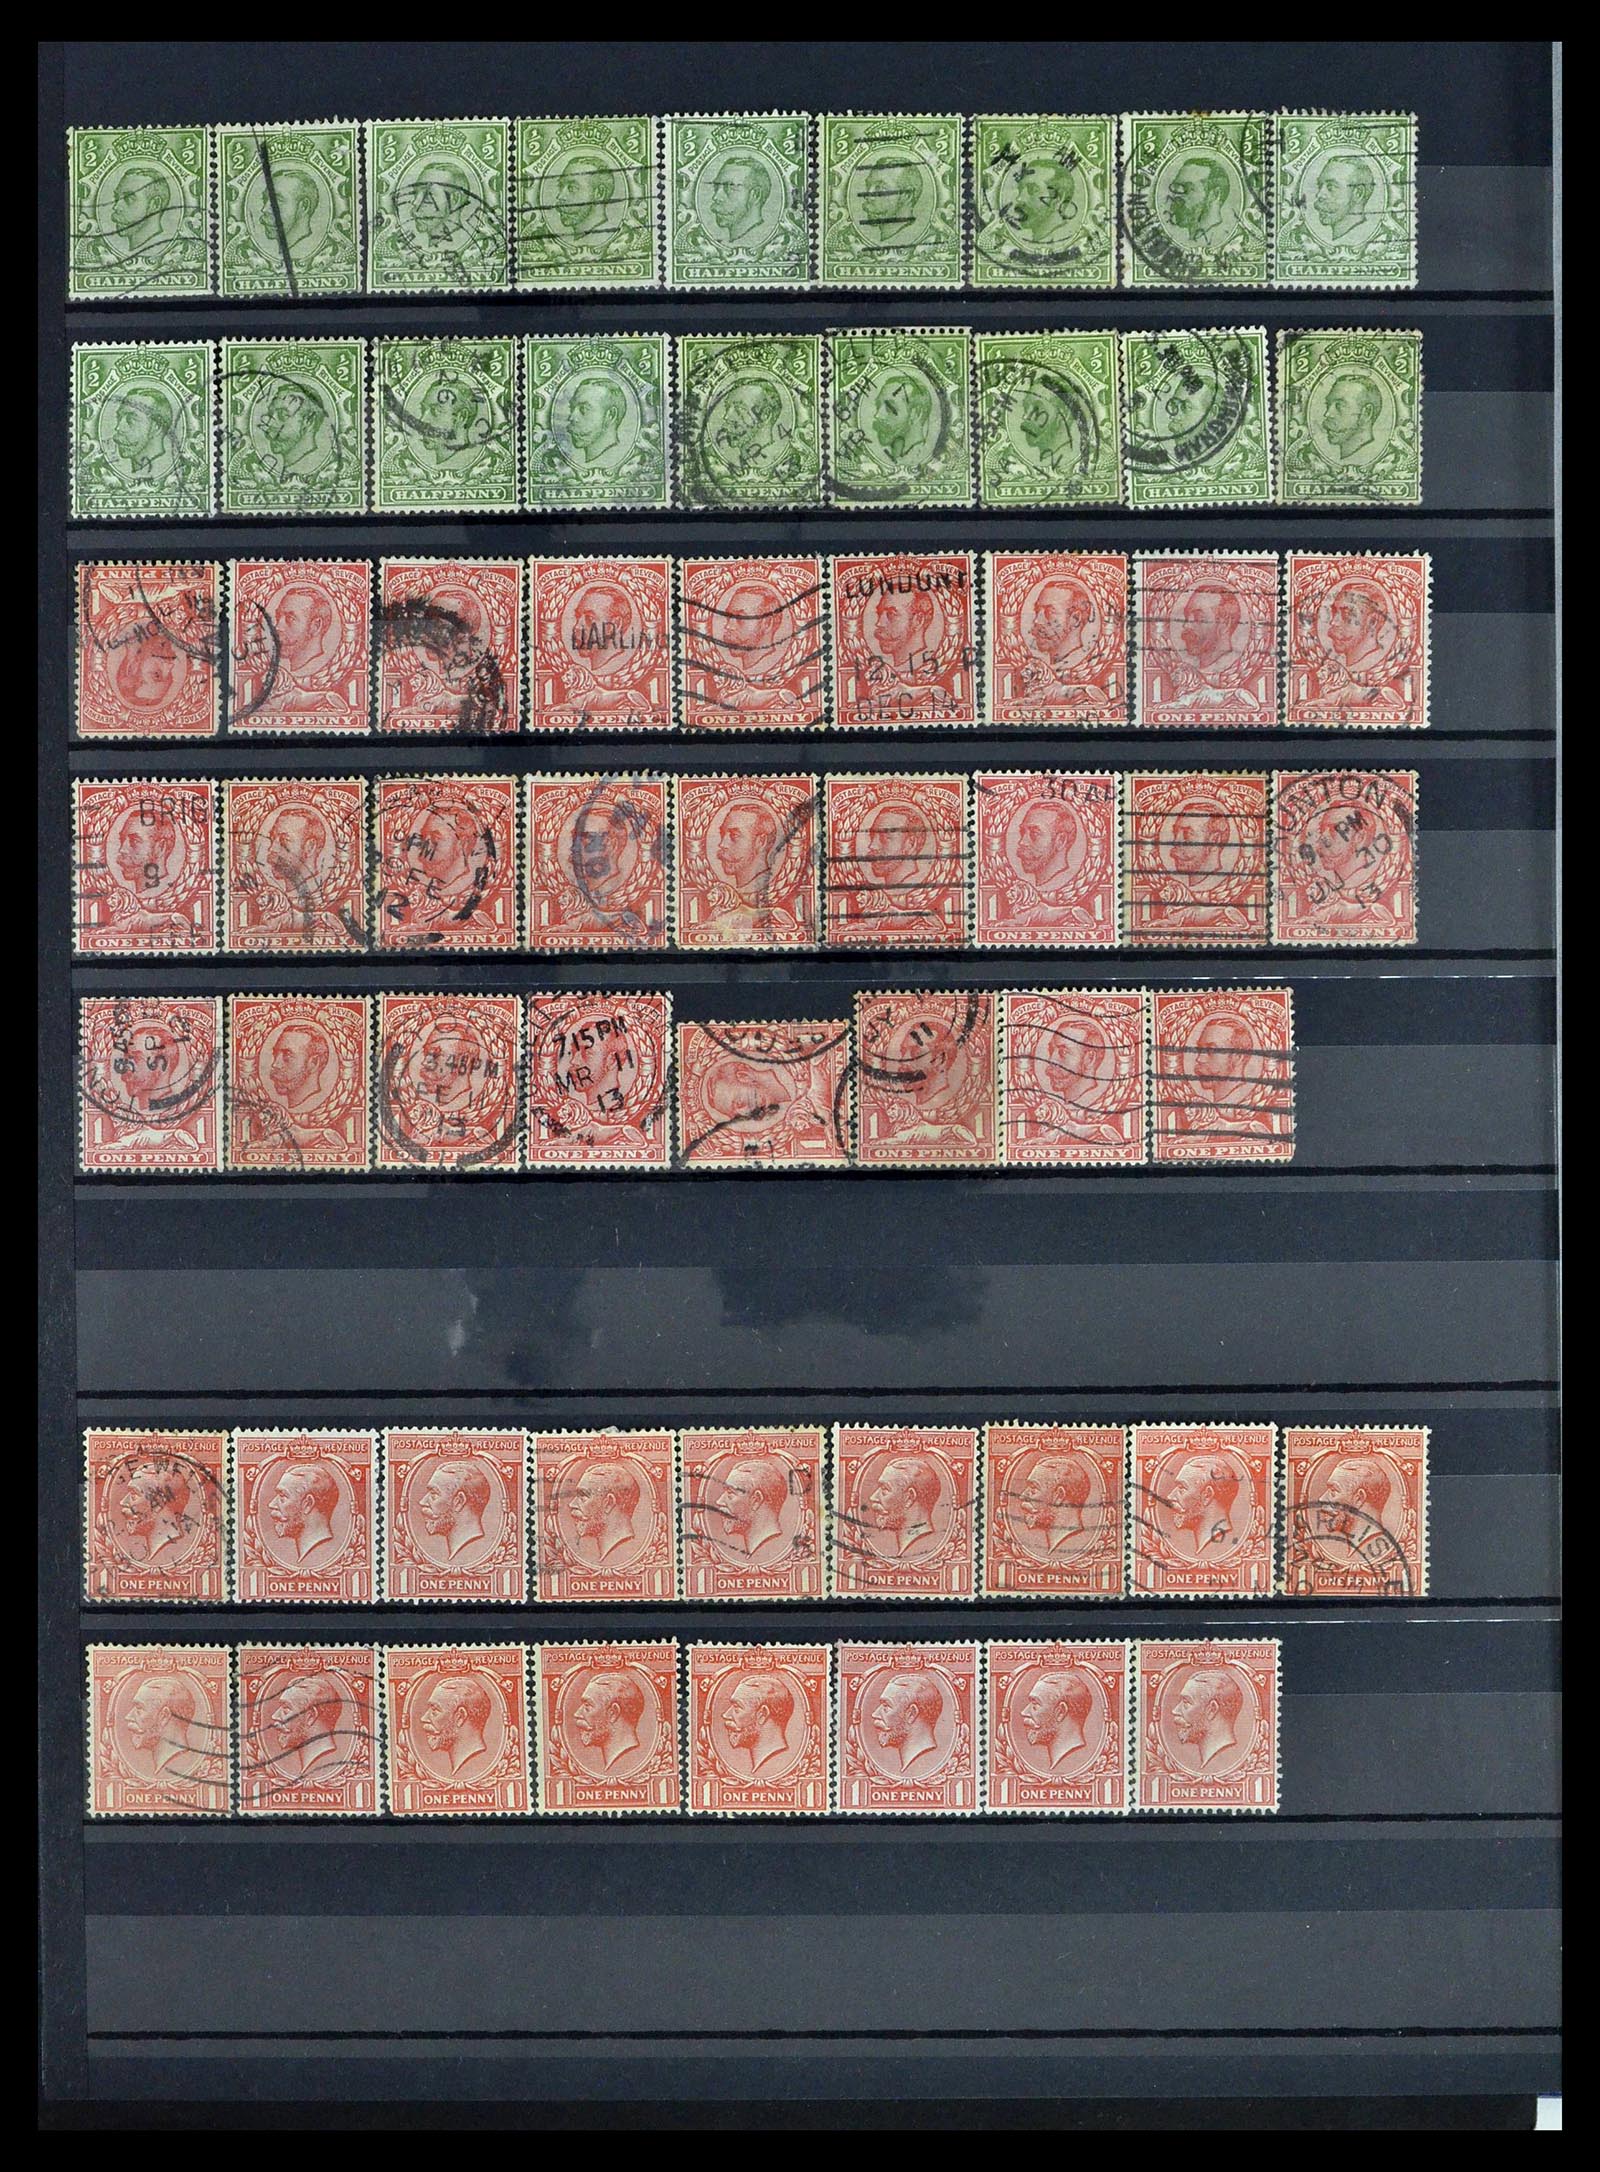 39196 0086 - Stamp collection 39196 Great Britain 1844-1955.